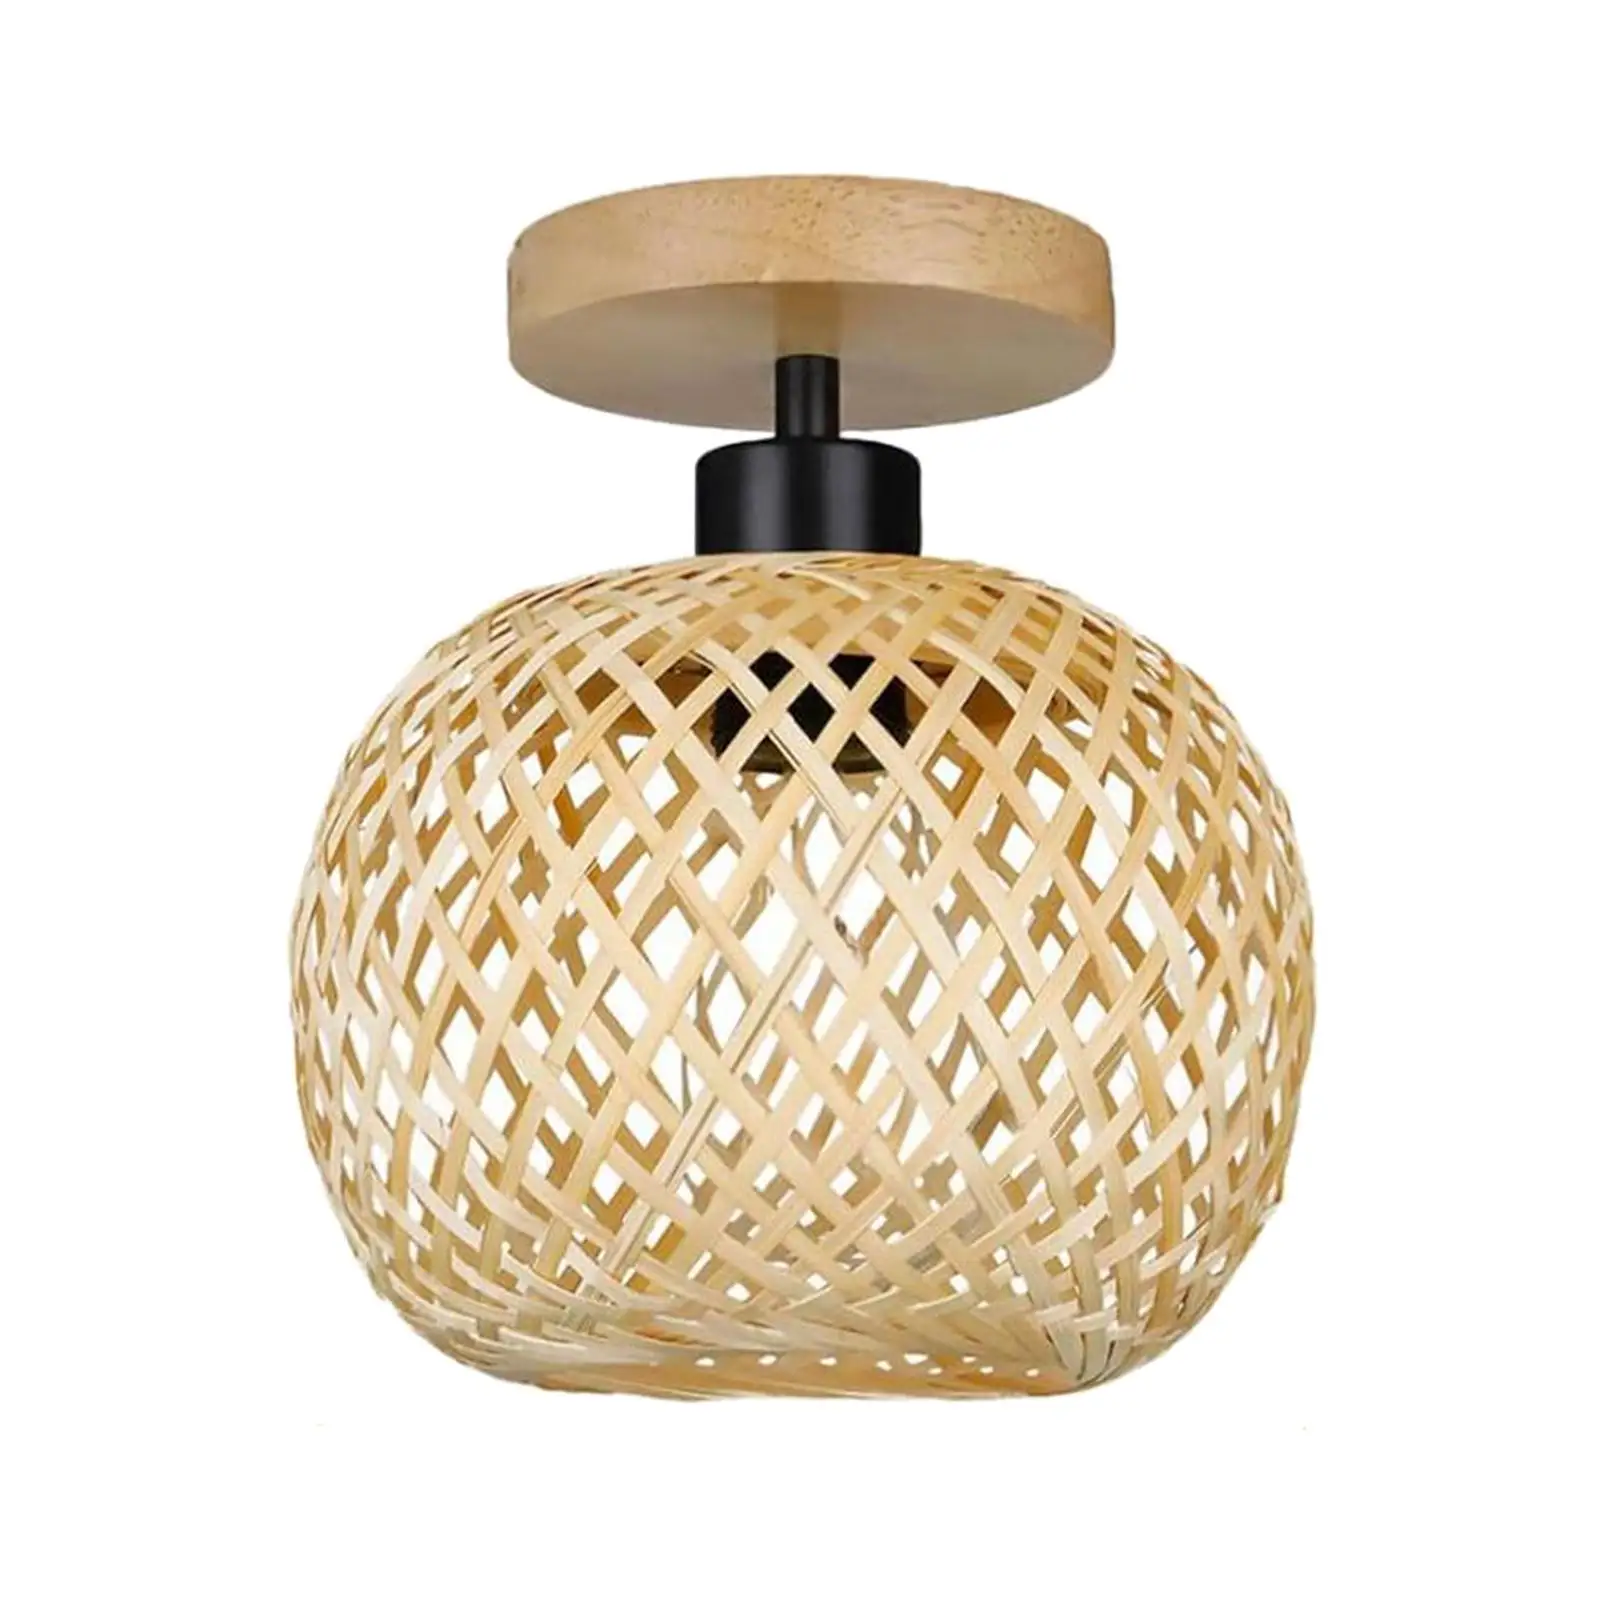 Pendant Lamp with No Bulb Living Room Rustic Style E27 Bamboo Table Lamp